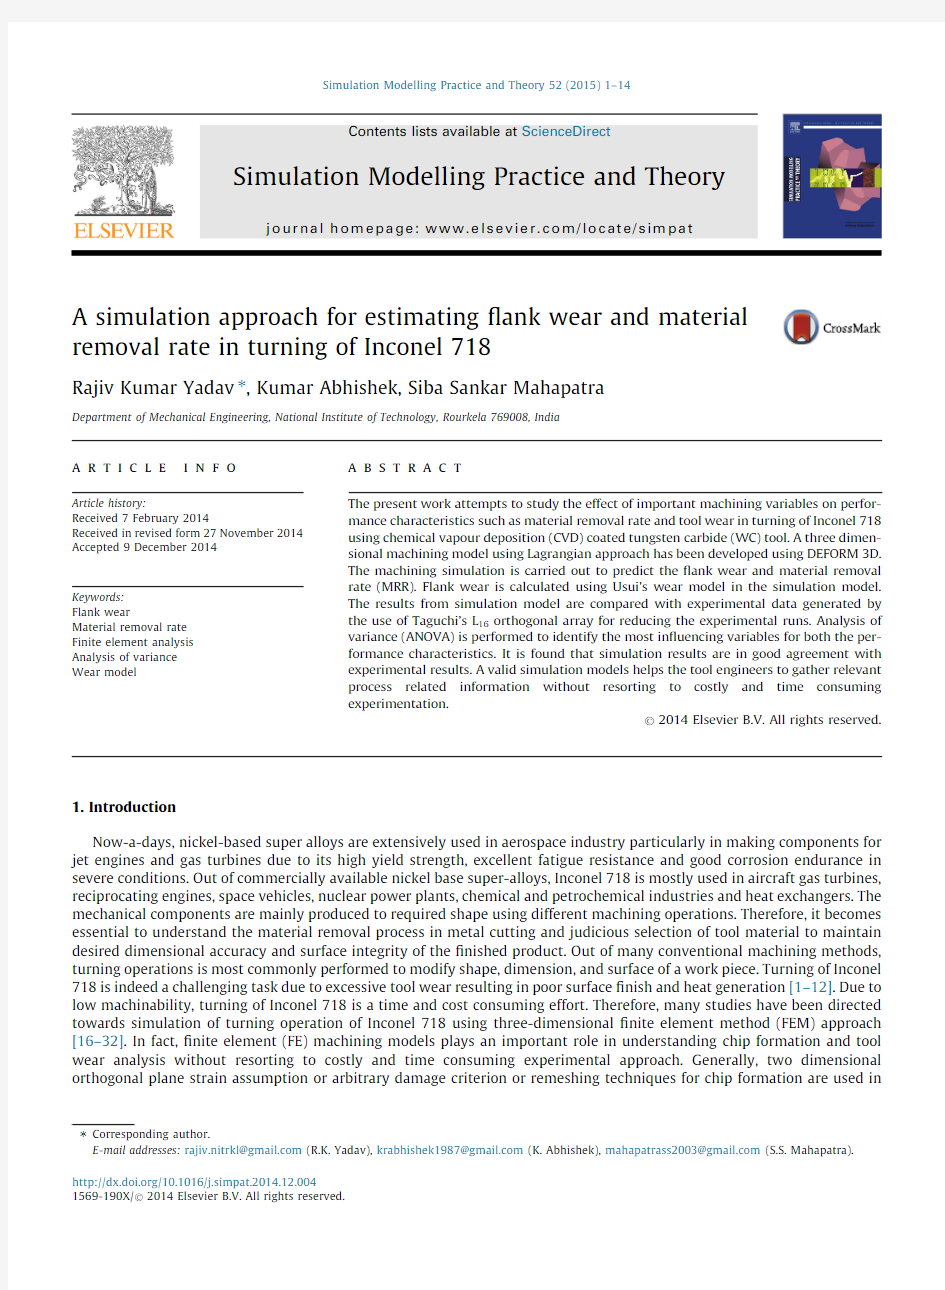 A simulation approach for estimating flank wear and material removal rate in turning of Inconel 718